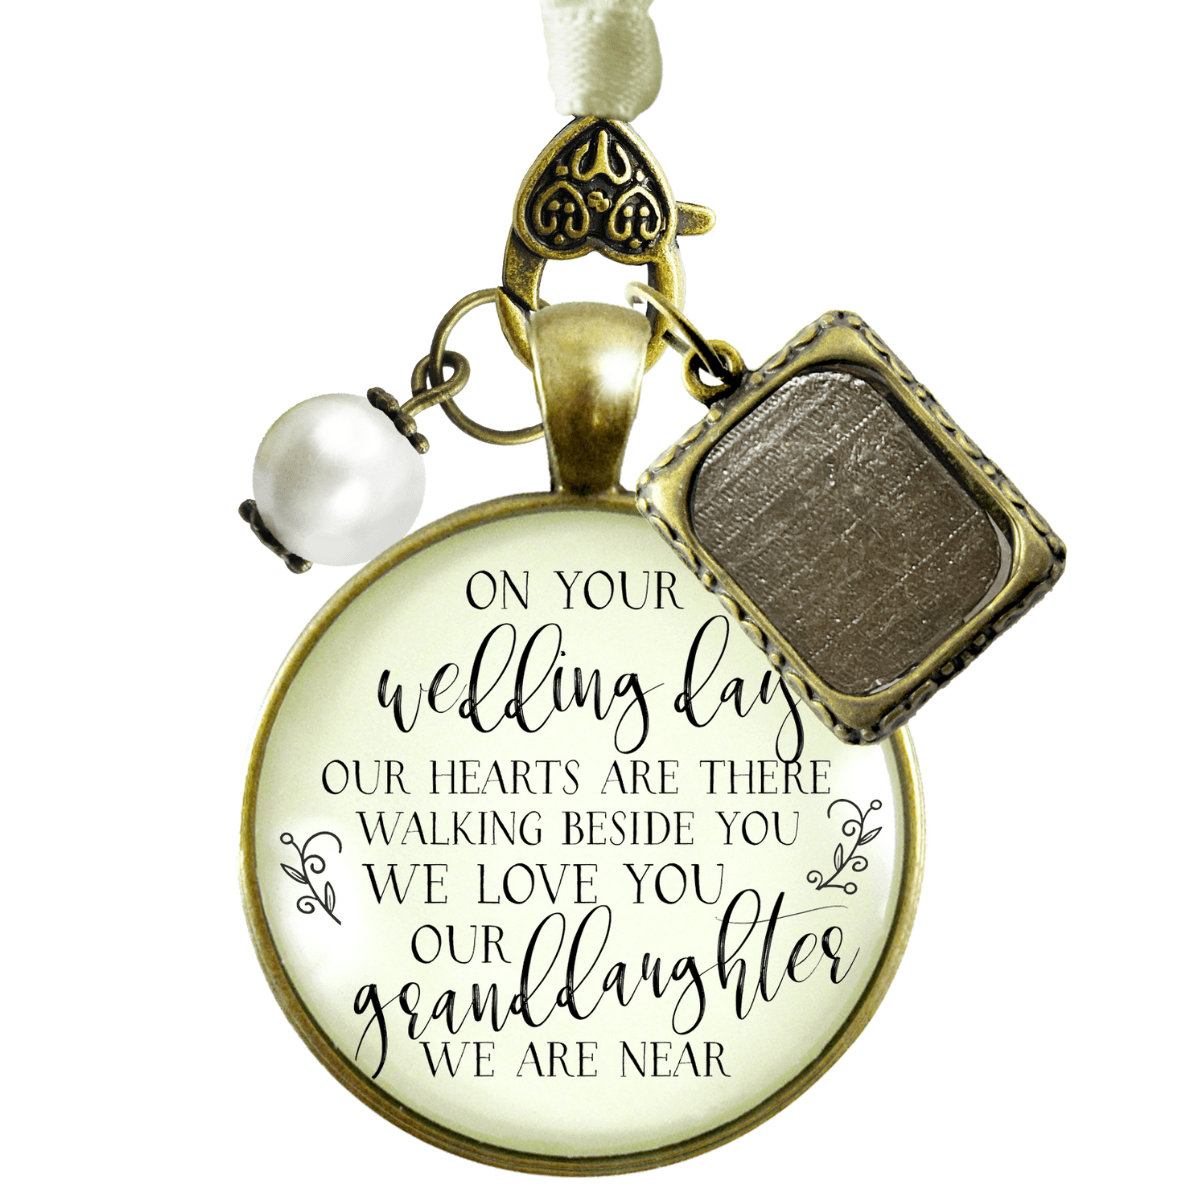 On Your Wedding Day OUR Heart Is There Walking Beside You GRANDDAUGHTER - BRONZE - CREAM - WHITE BEAD